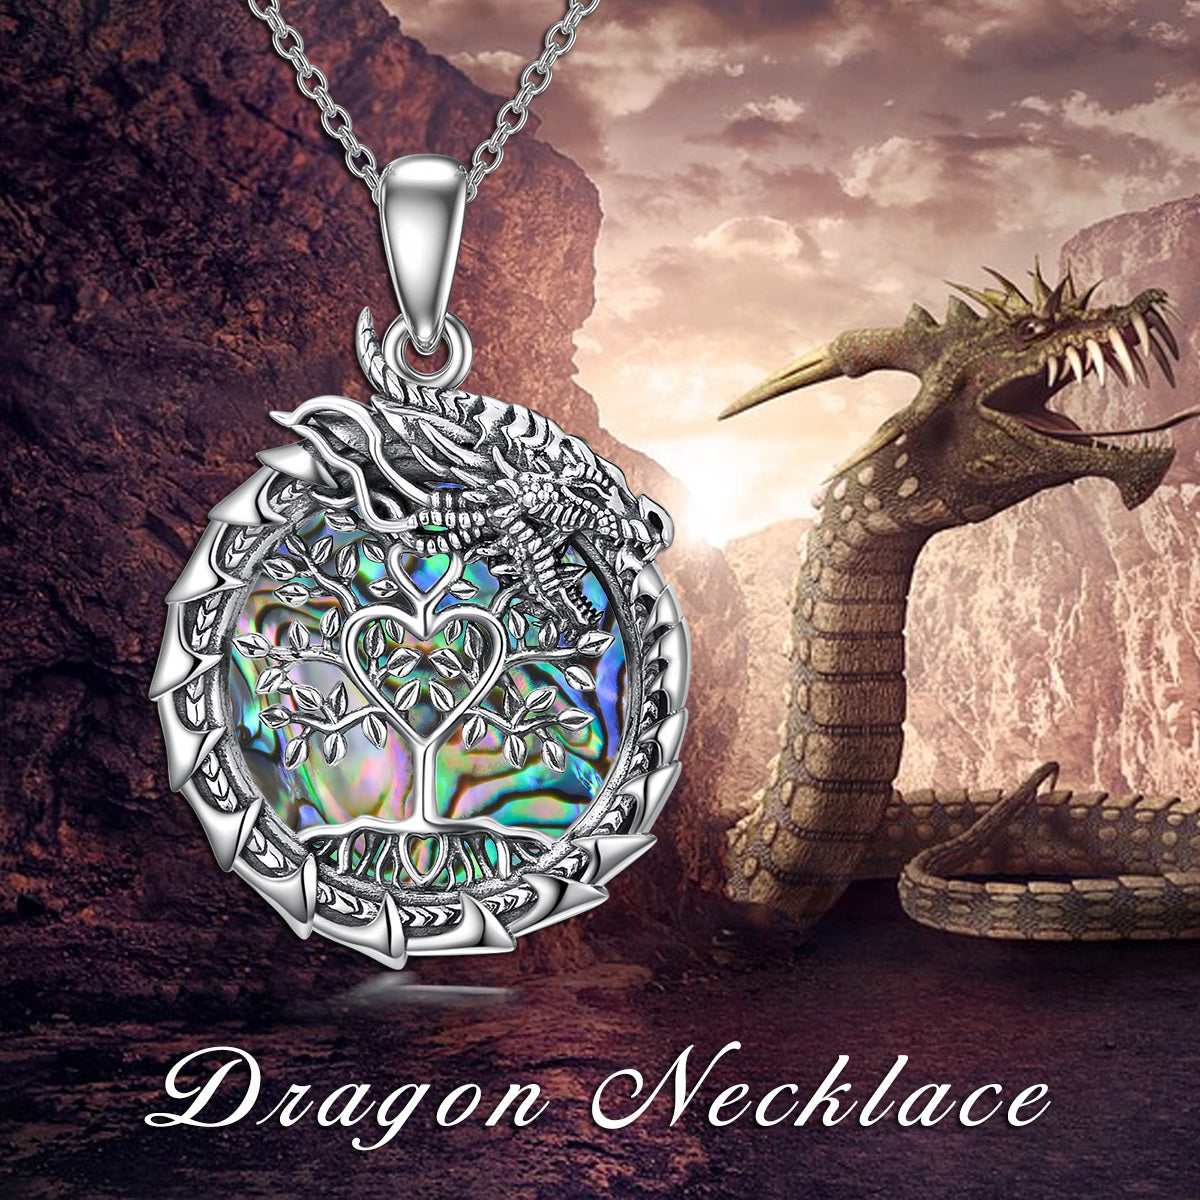 A Dragon Necklace Tree of Life Family Tree Necklace Abalone Shell Pendant Jewelry Gifts for Women Men by Maramalive™ with an image of a dragon and a tree.